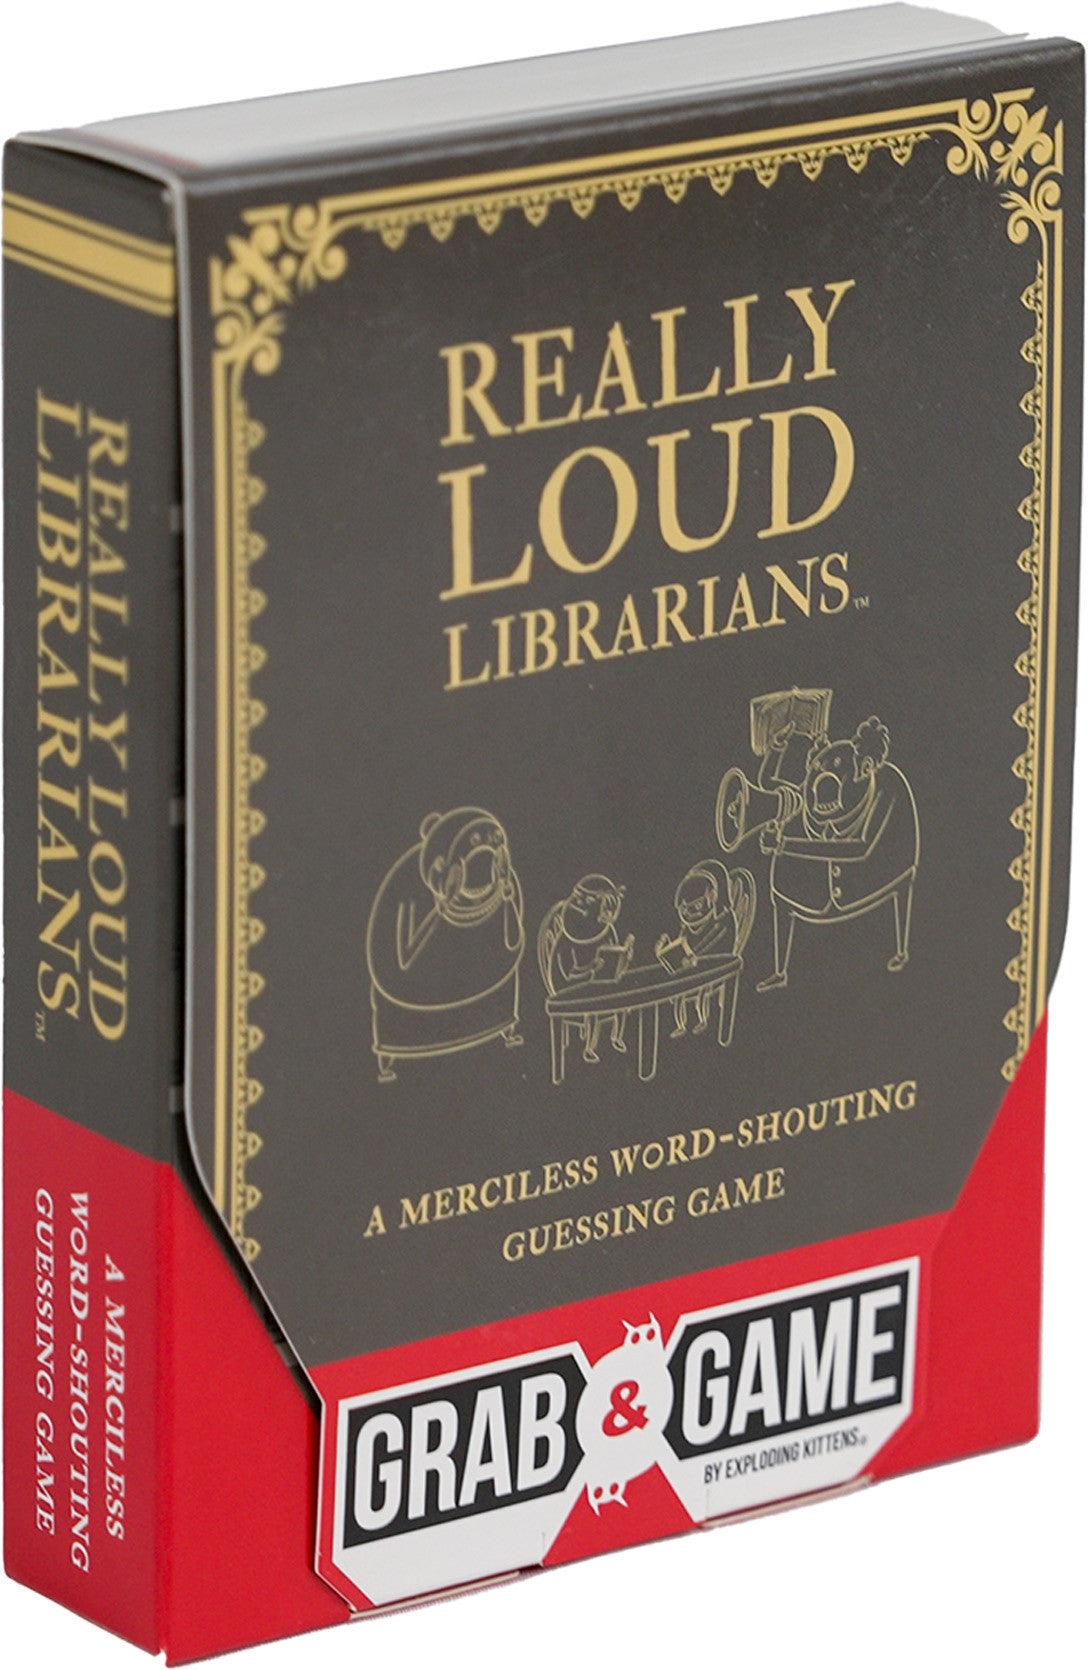 Grab & Game - Really Loud Librarians (by Exploding Kittens)